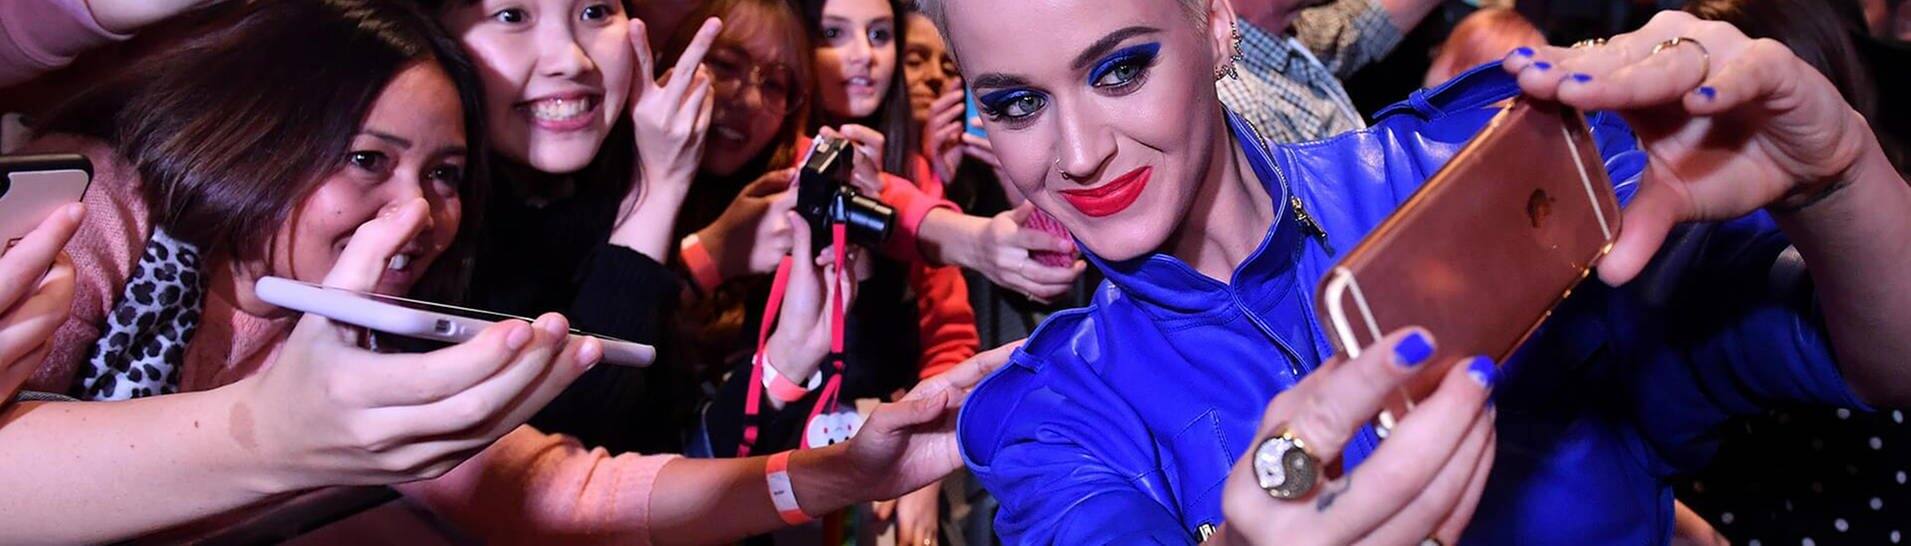 Katy Perry (Foto: dpa/picture-alliance)